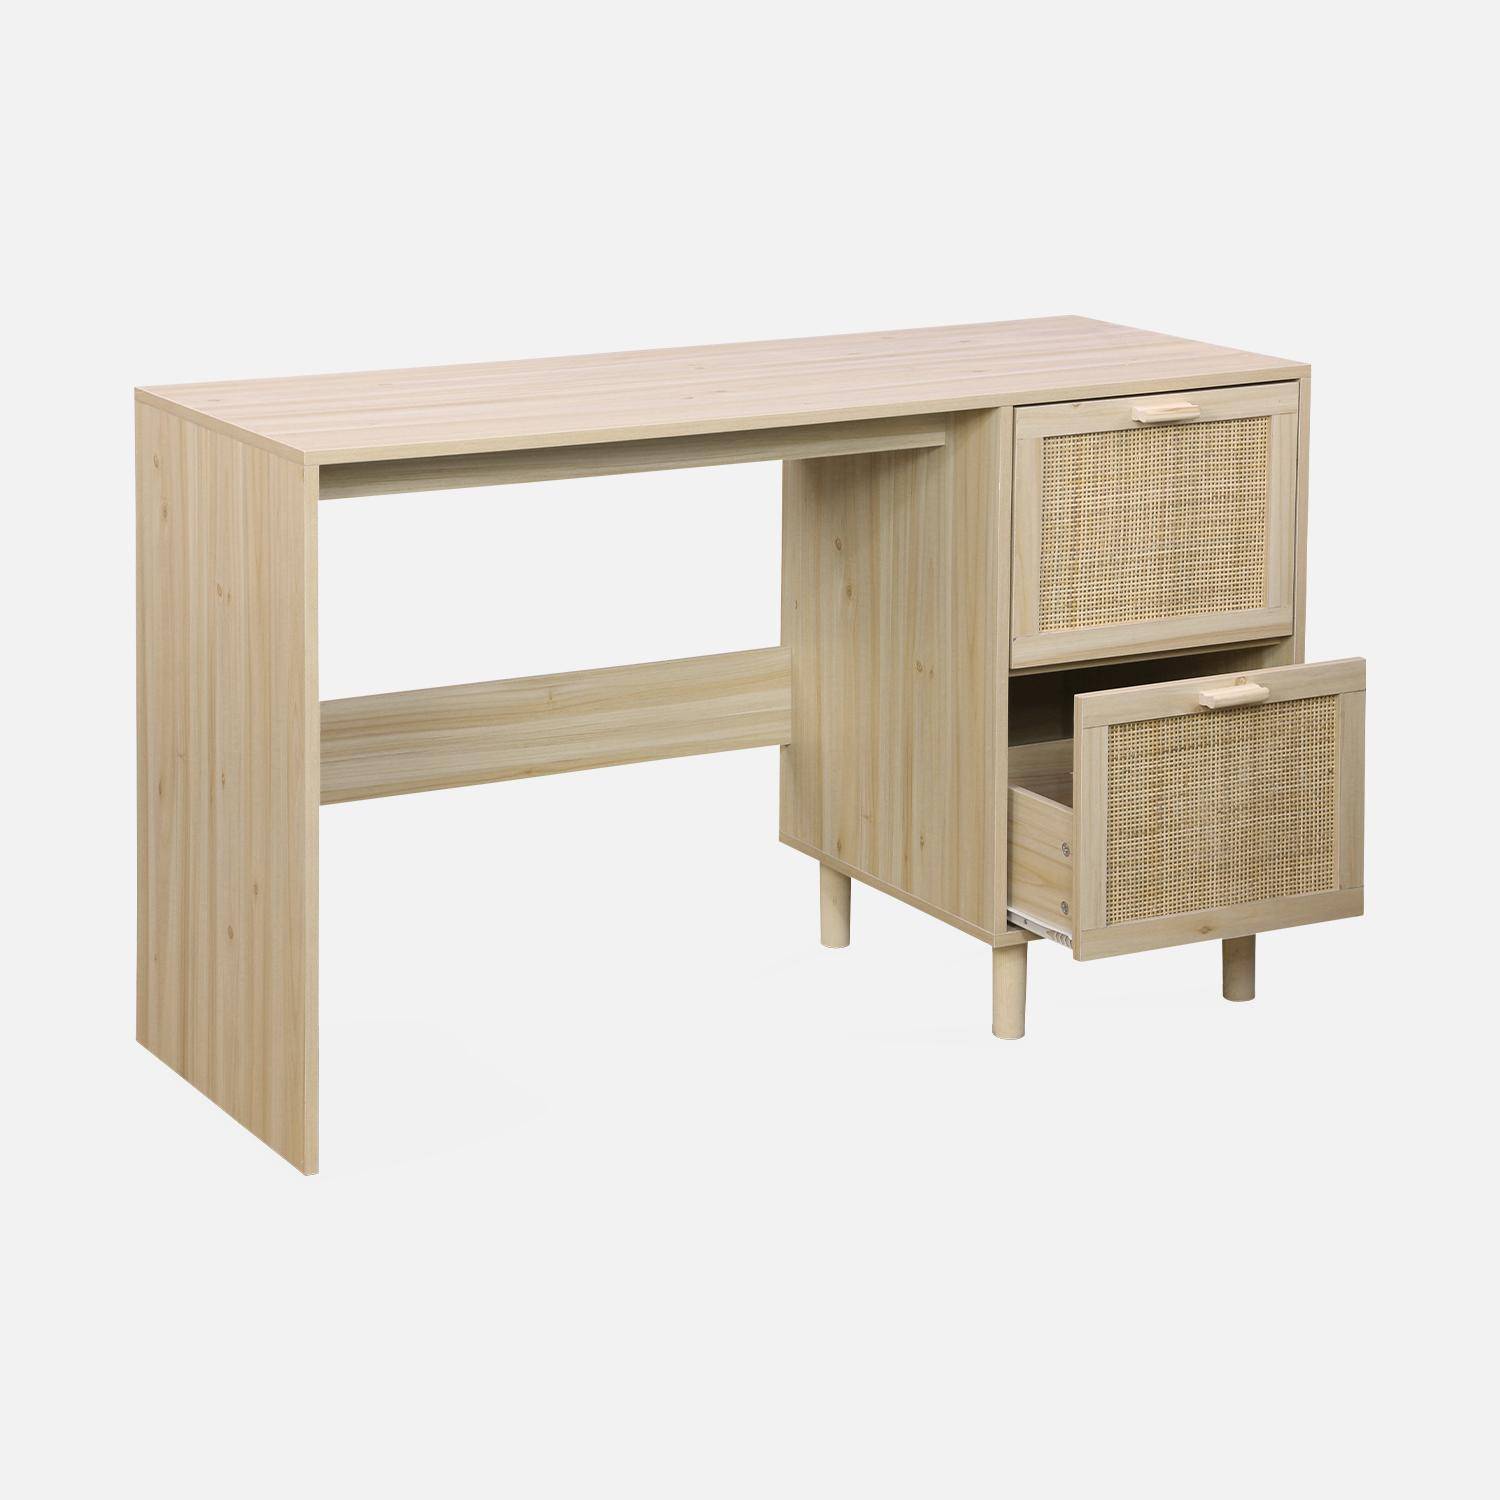 Woven rattan desk with 2 drawers, 120x48x75cm - Camargue - Natural,sweeek,Photo5